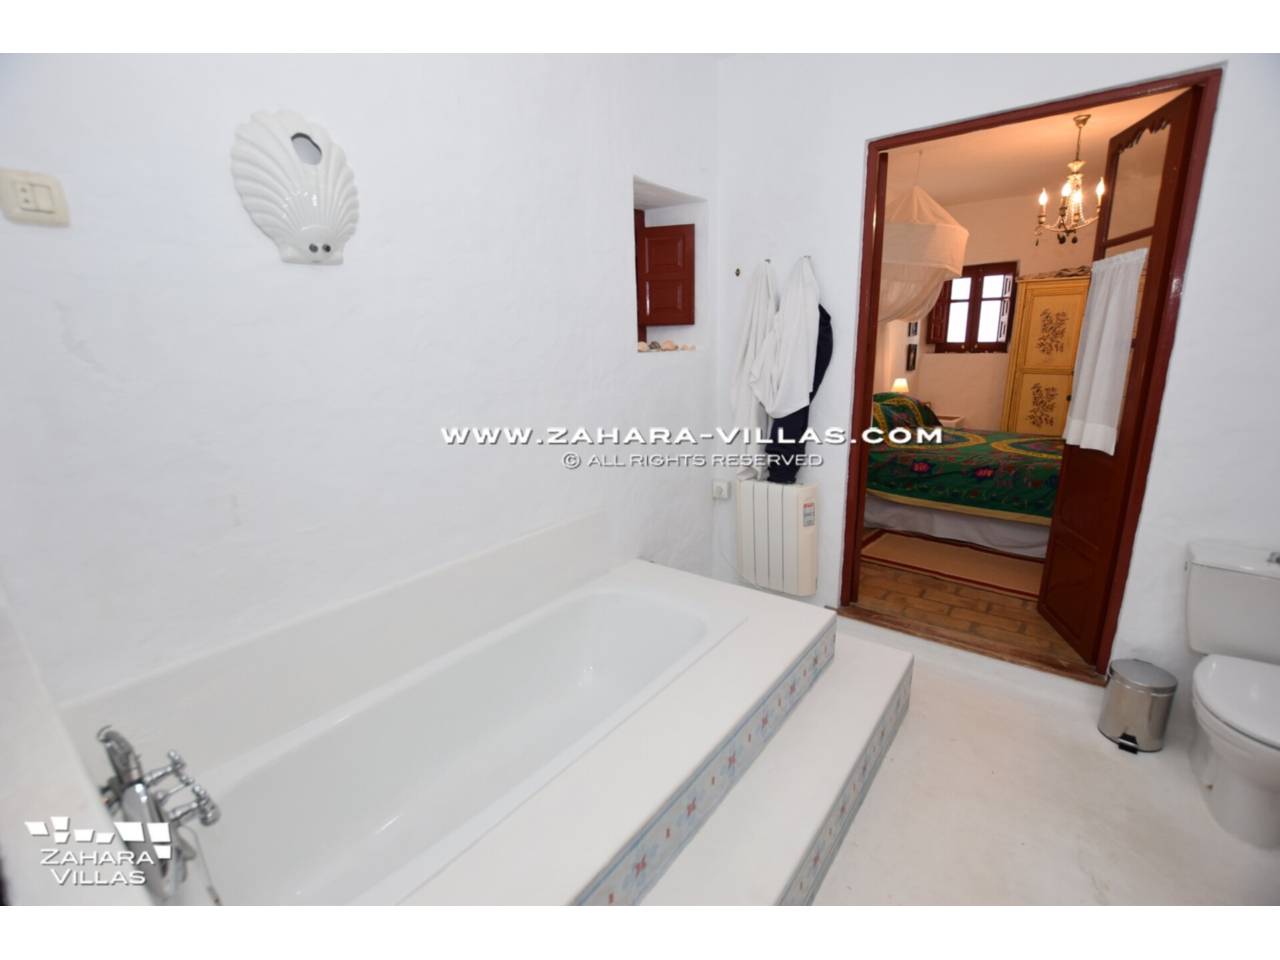 Imagen 33 de Magnificent House with central patio, in the historic center of the town